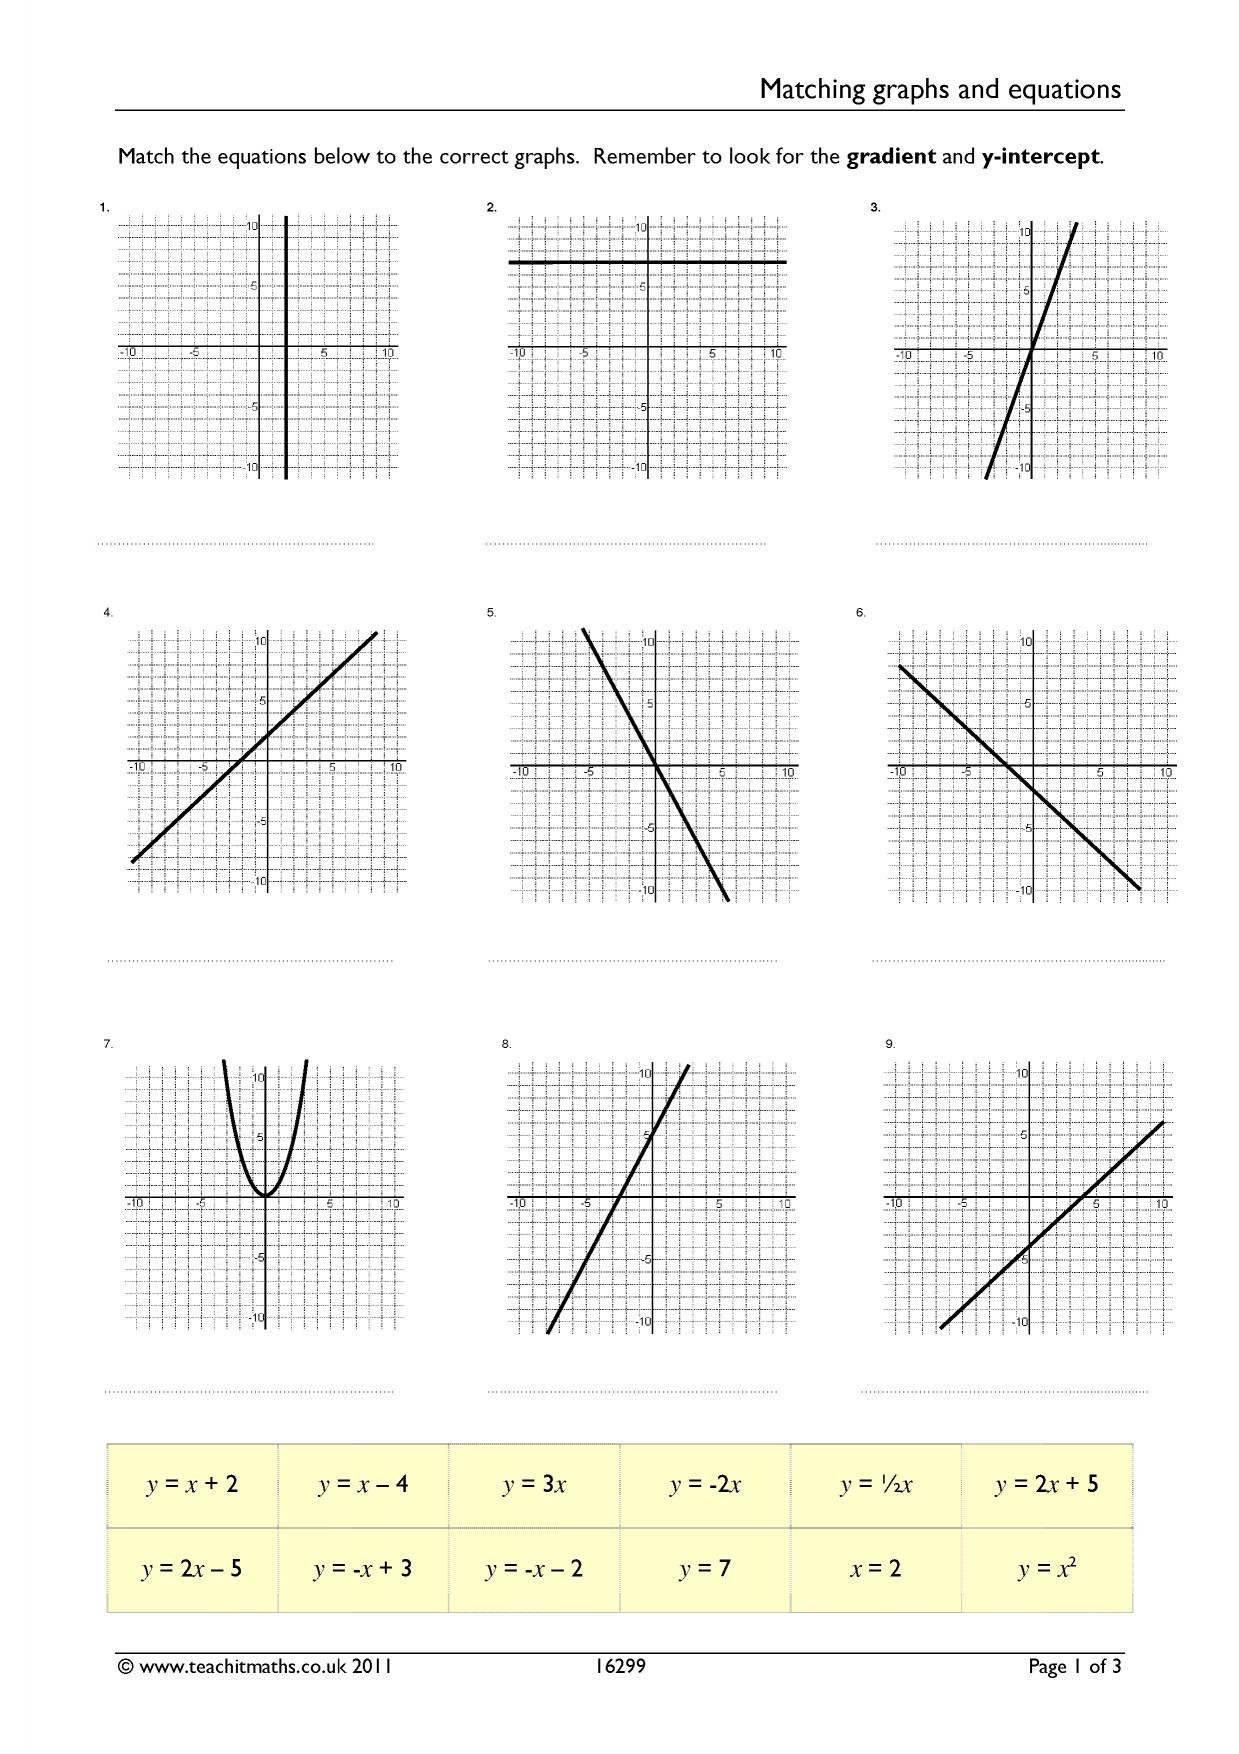 graphing-linear-functions-worksheet-db-excel